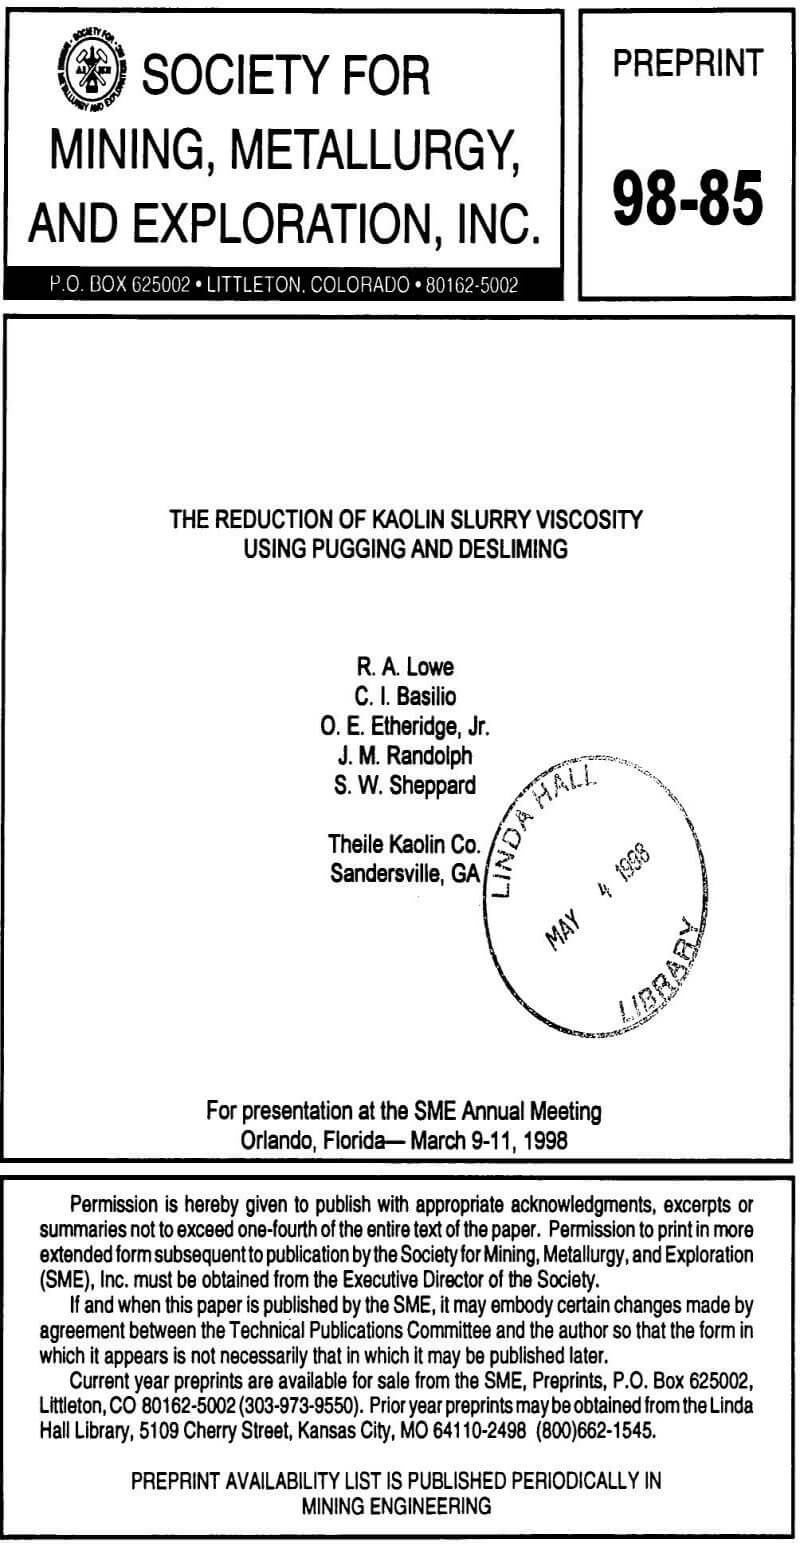 the reduction of kaolin slurry viscosity using pugging and desliming